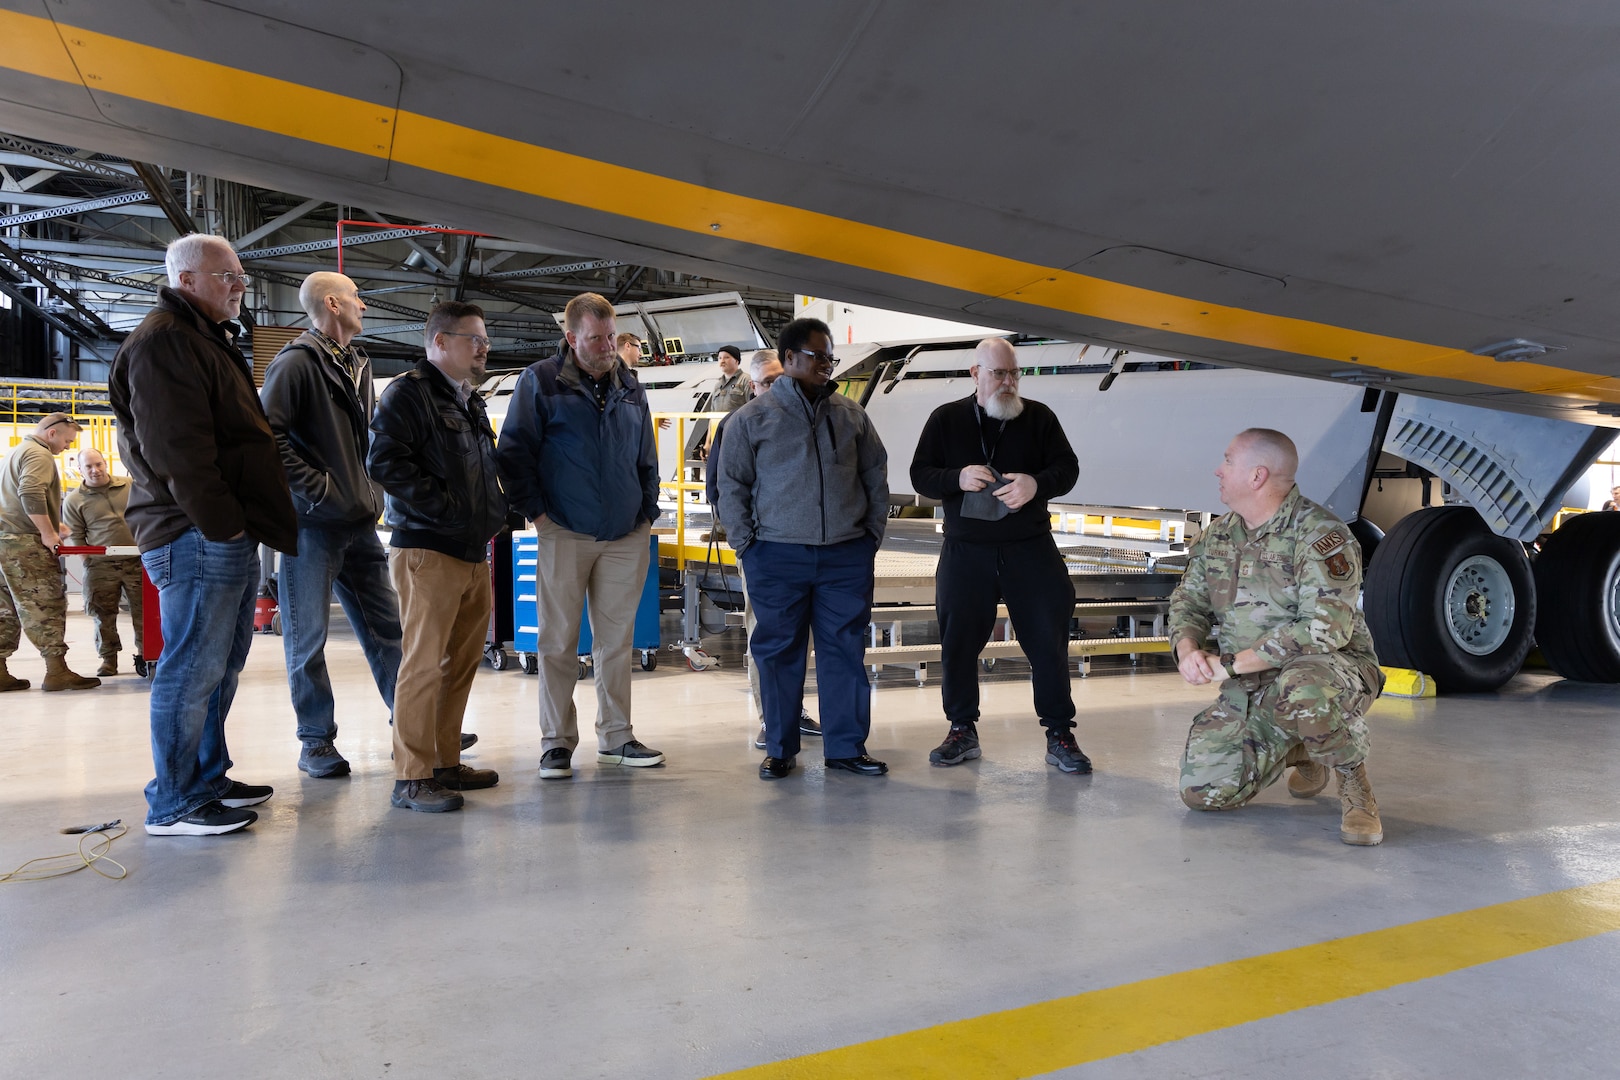 A bald man in a camoflage uniform squats underneath a gray cargo/refueling plane undergoing phase maintenance and inspection or ISO. It is surrounded by scaffolding and is inside a hanger. He is speaking to a group of men in business casual attire.